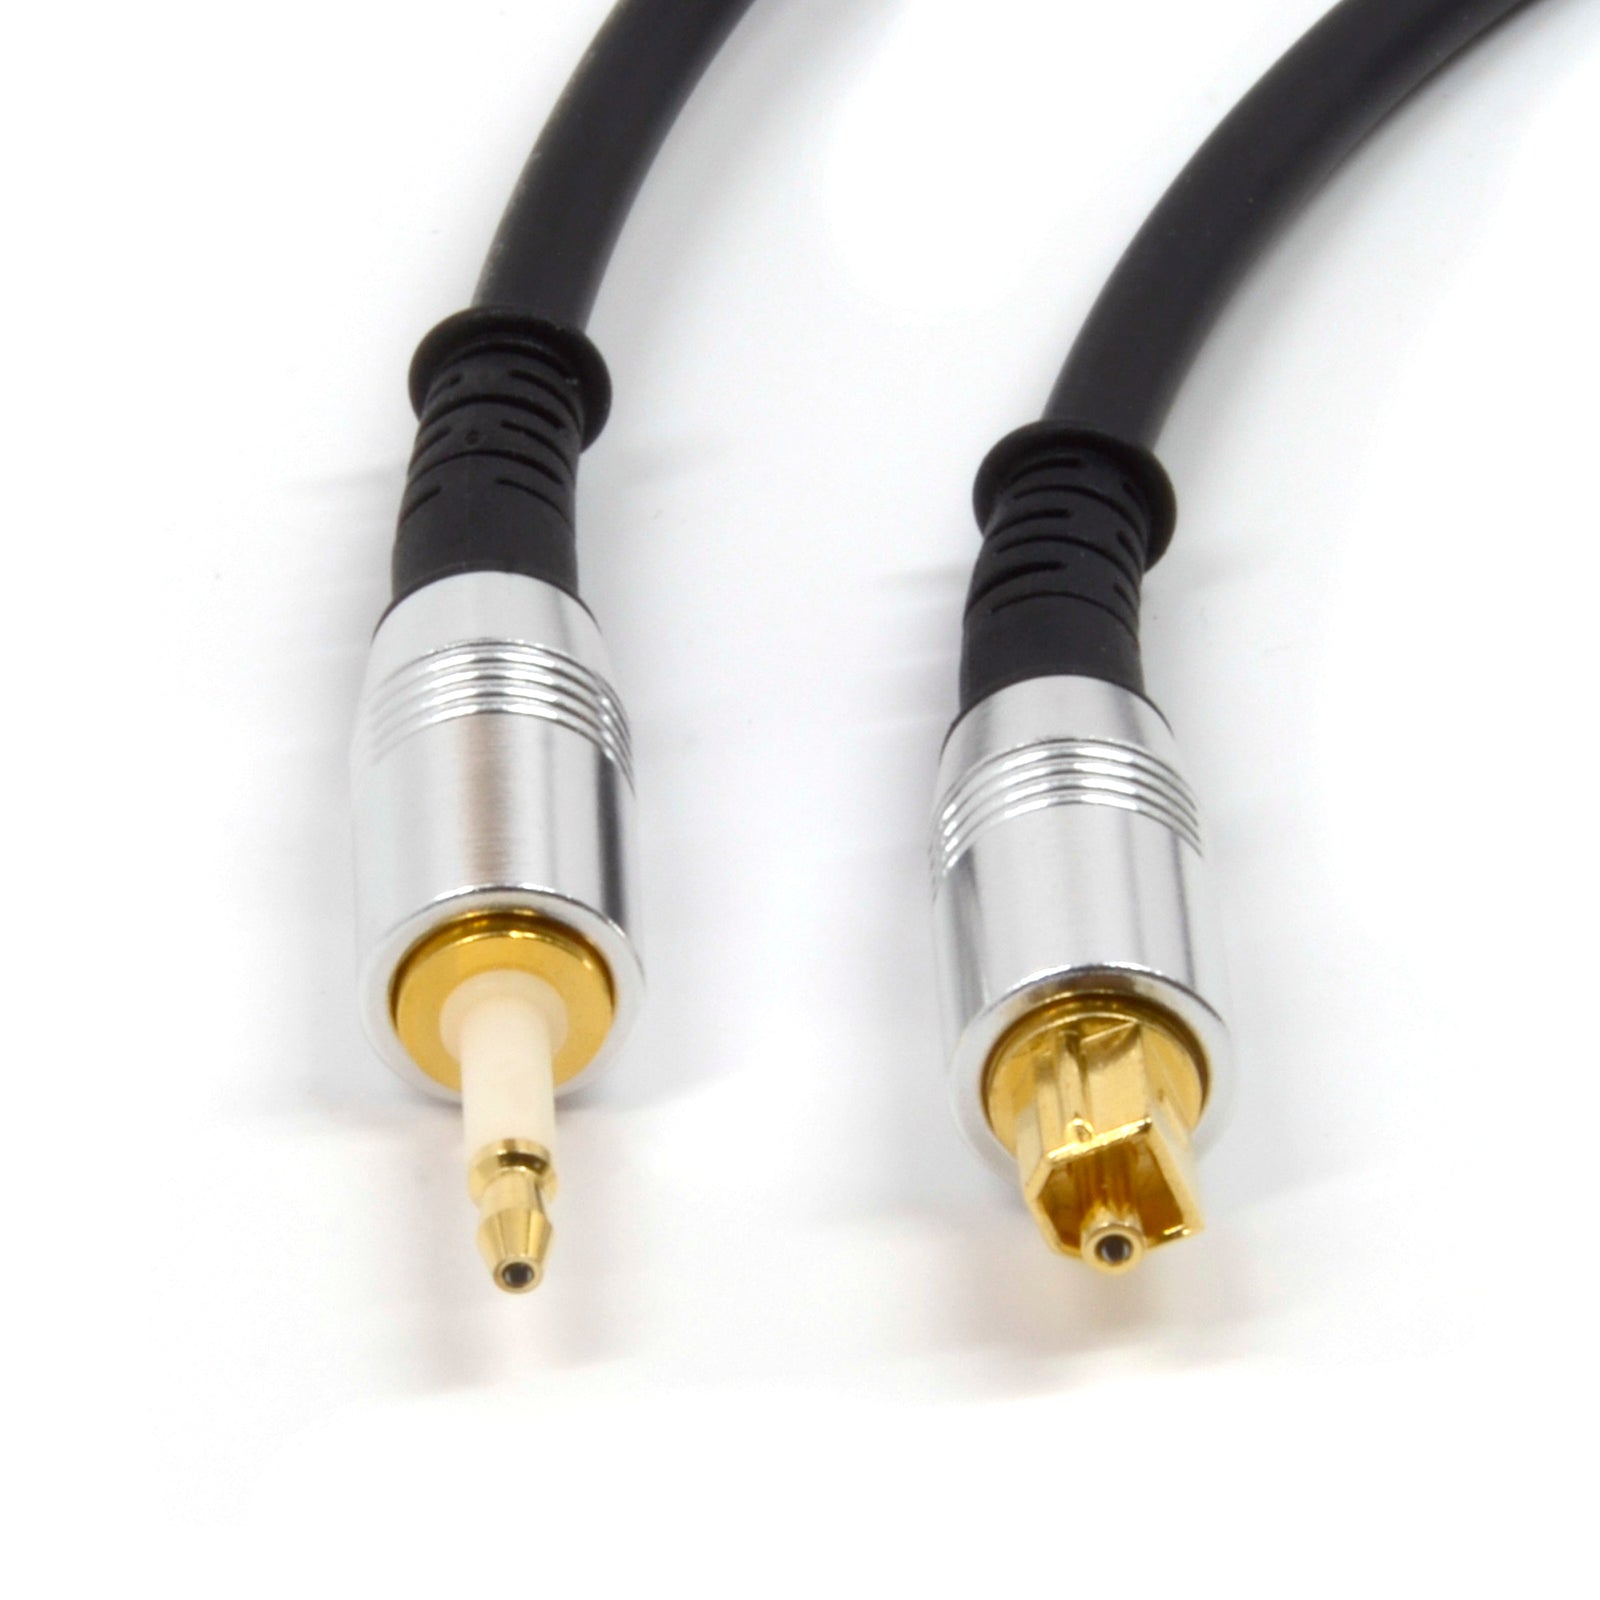 Benchmark BNC to RCA Coaxial Cable for Digital Audio or Analog